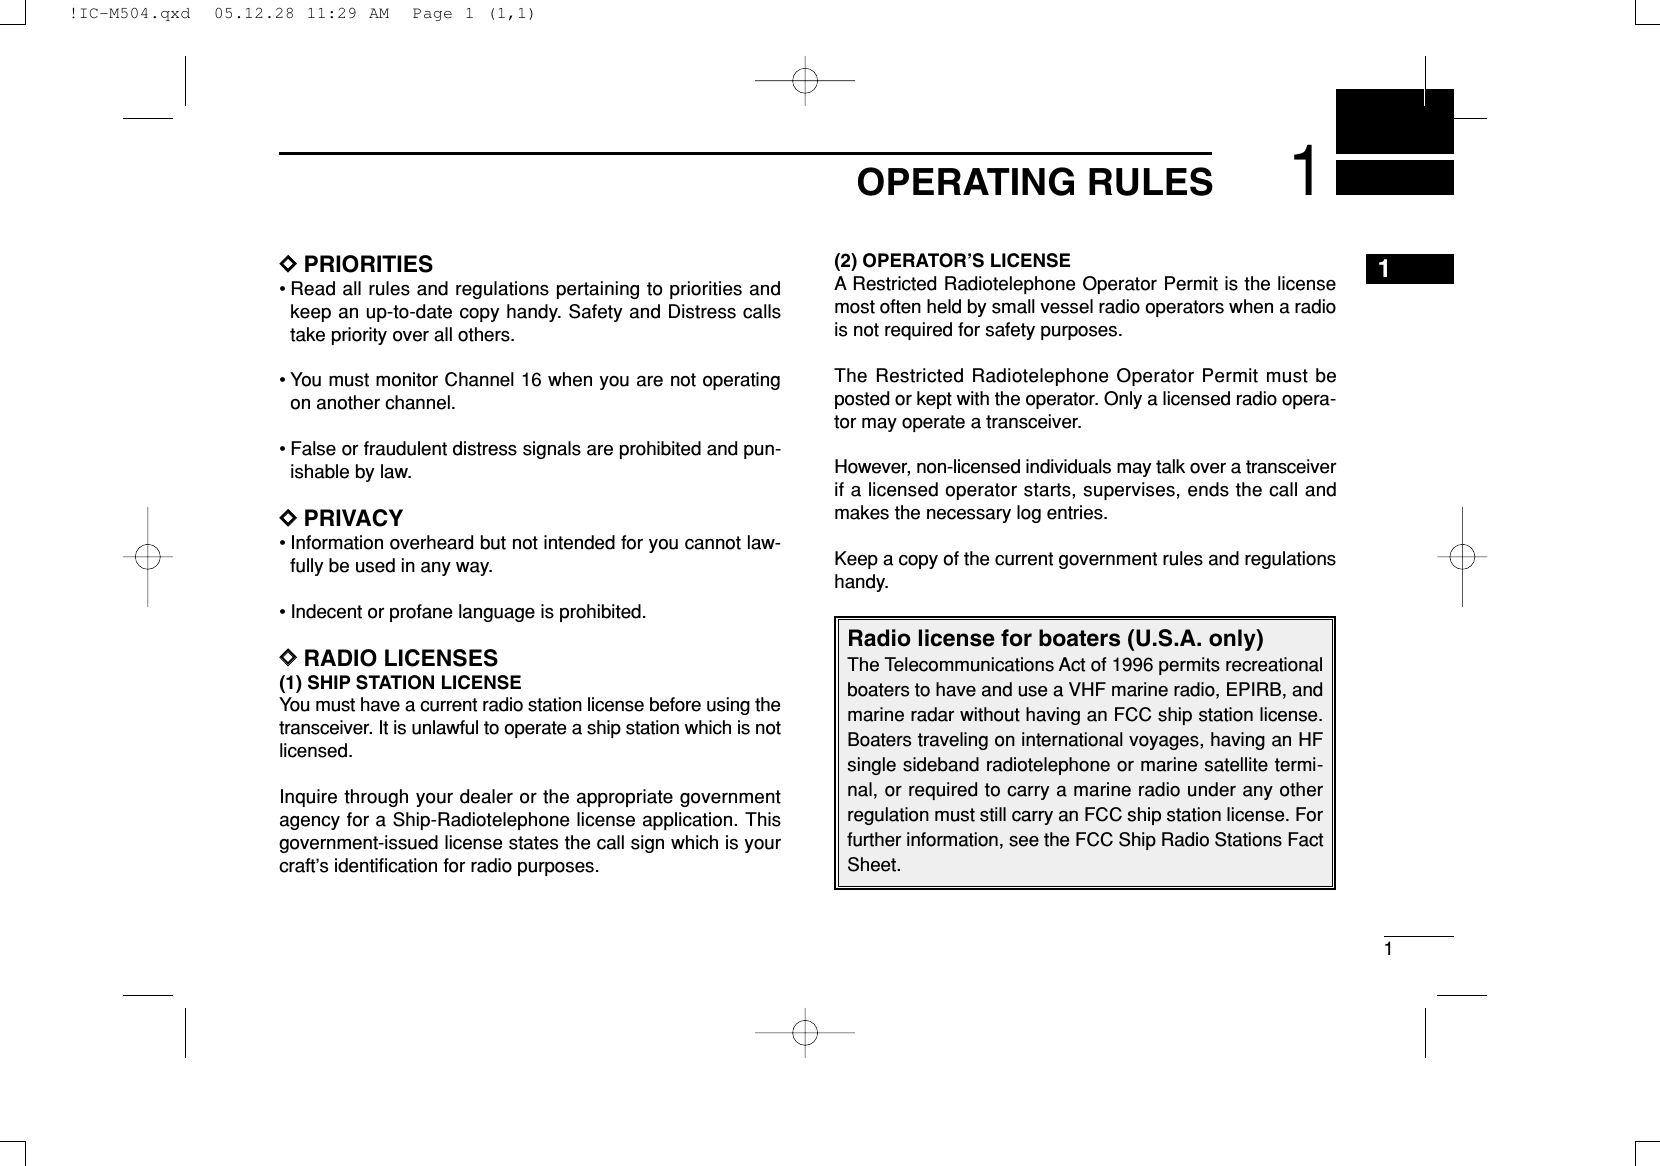 11OPERATING RULESDDPRIORITIES• Read all rules and regulations pertaining to priorities andkeep an up-to-date copy handy. Safety and Distress callstake priority over all others.• You must monitor Channel 16 when you are not operatingon another channel.• False or fraudulent distress signals are prohibited and pun-ishable by law.DDPRIVACY• Information overheard but not intended for you cannot law-fully be used in any way.• Indecent or profane language is prohibited.DDRADIO LICENSES(1) SHIP STATION LICENSEYou must have a current radio station license before using thetransceiver. It is unlawful to operate a ship station which is notlicensed.Inquire through your dealer or the appropriate governmentagency for a Ship-Radiotelephone license application. Thisgovernment-issued license states the call sign which is yourcraft’s identiﬁcation for radio purposes.(2) OPERATOR’S LICENSEA Restricted Radiotelephone Operator Permit is the licensemost often held by small vessel radio operators when a radiois not required for safety purposes.The Restricted Radiotelephone Operator Permit must beposted or kept with the operator. Only a licensed radio opera-tor may operate a transceiver.However, non-licensed individuals may talk over a transceiverif a licensed operator starts, supervises, ends the call andmakes the necessary log entries.Keep a copy of the current government rules and regulationshandy.Radio license for boaters (U.S.A. only)The Telecommunications Act of 1996 permits recreationalboaters to have and use a VHF marine radio, EPIRB, andmarine radar without having an FCC ship station license.Boaters traveling on international voyages, having an HFsingle sideband radiotelephone or marine satellite termi-nal, or required to carry a marine radio under any otherregulation must still carry an FCC ship station license. Forfurther information, see the FCC Ship Radio Stations FactSheet.1!IC-M504.qxd  05.12.28 11:29 AM  Page 1 (1,1)